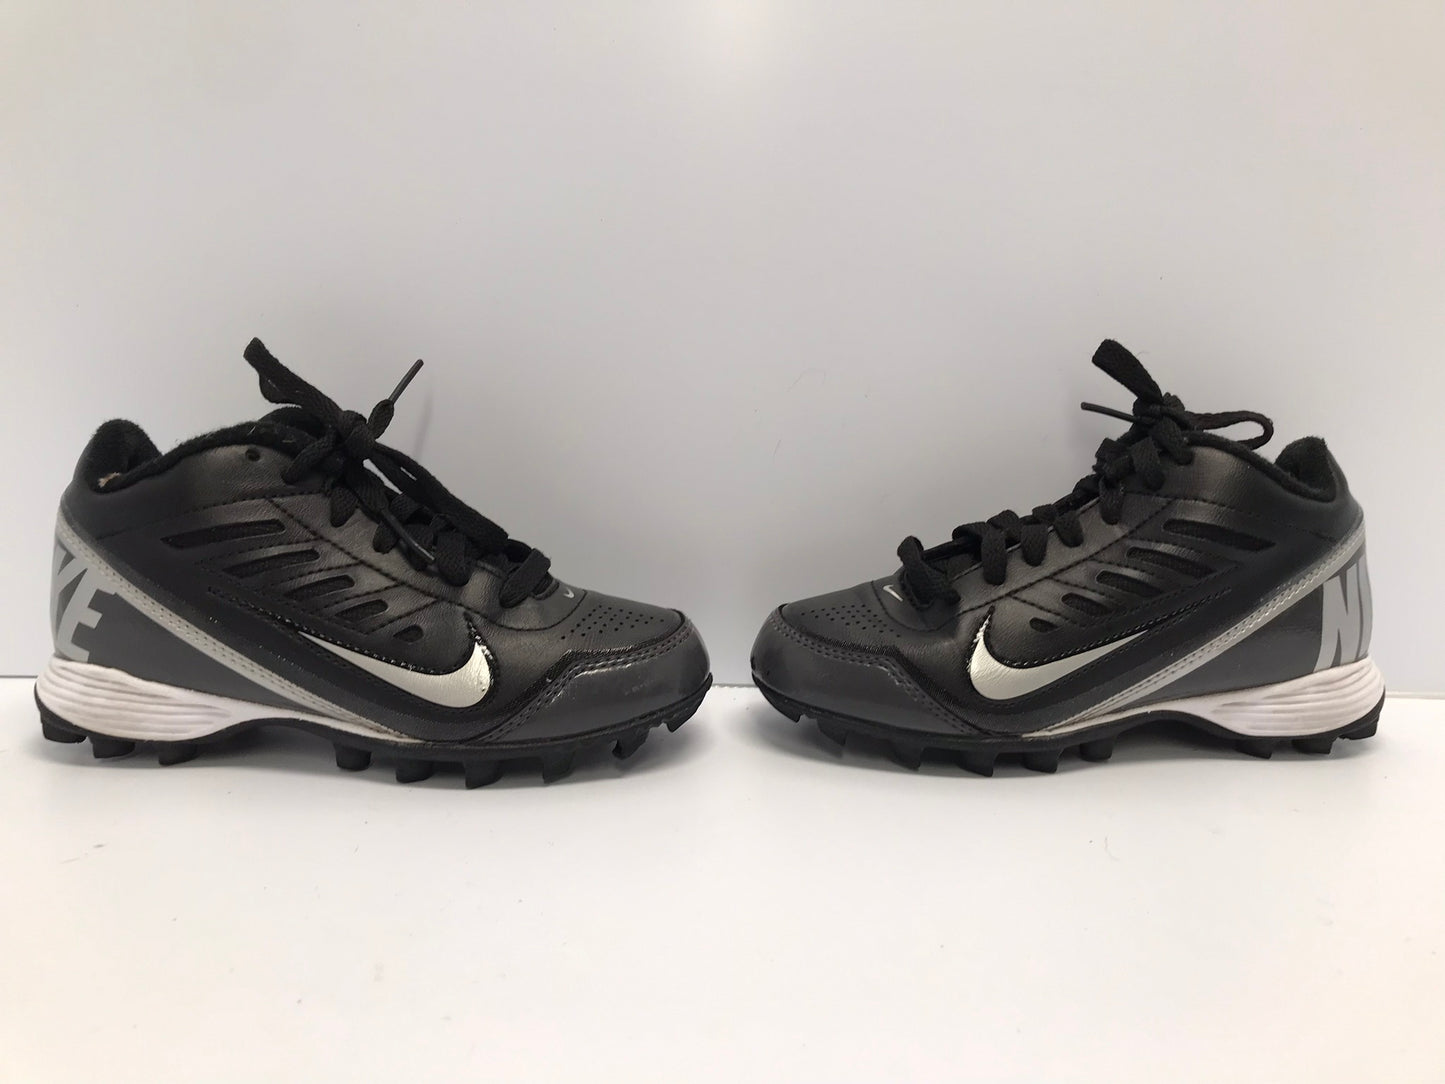 Baseball Shoes Cleats Child Size 1 Nike Black Grey As New